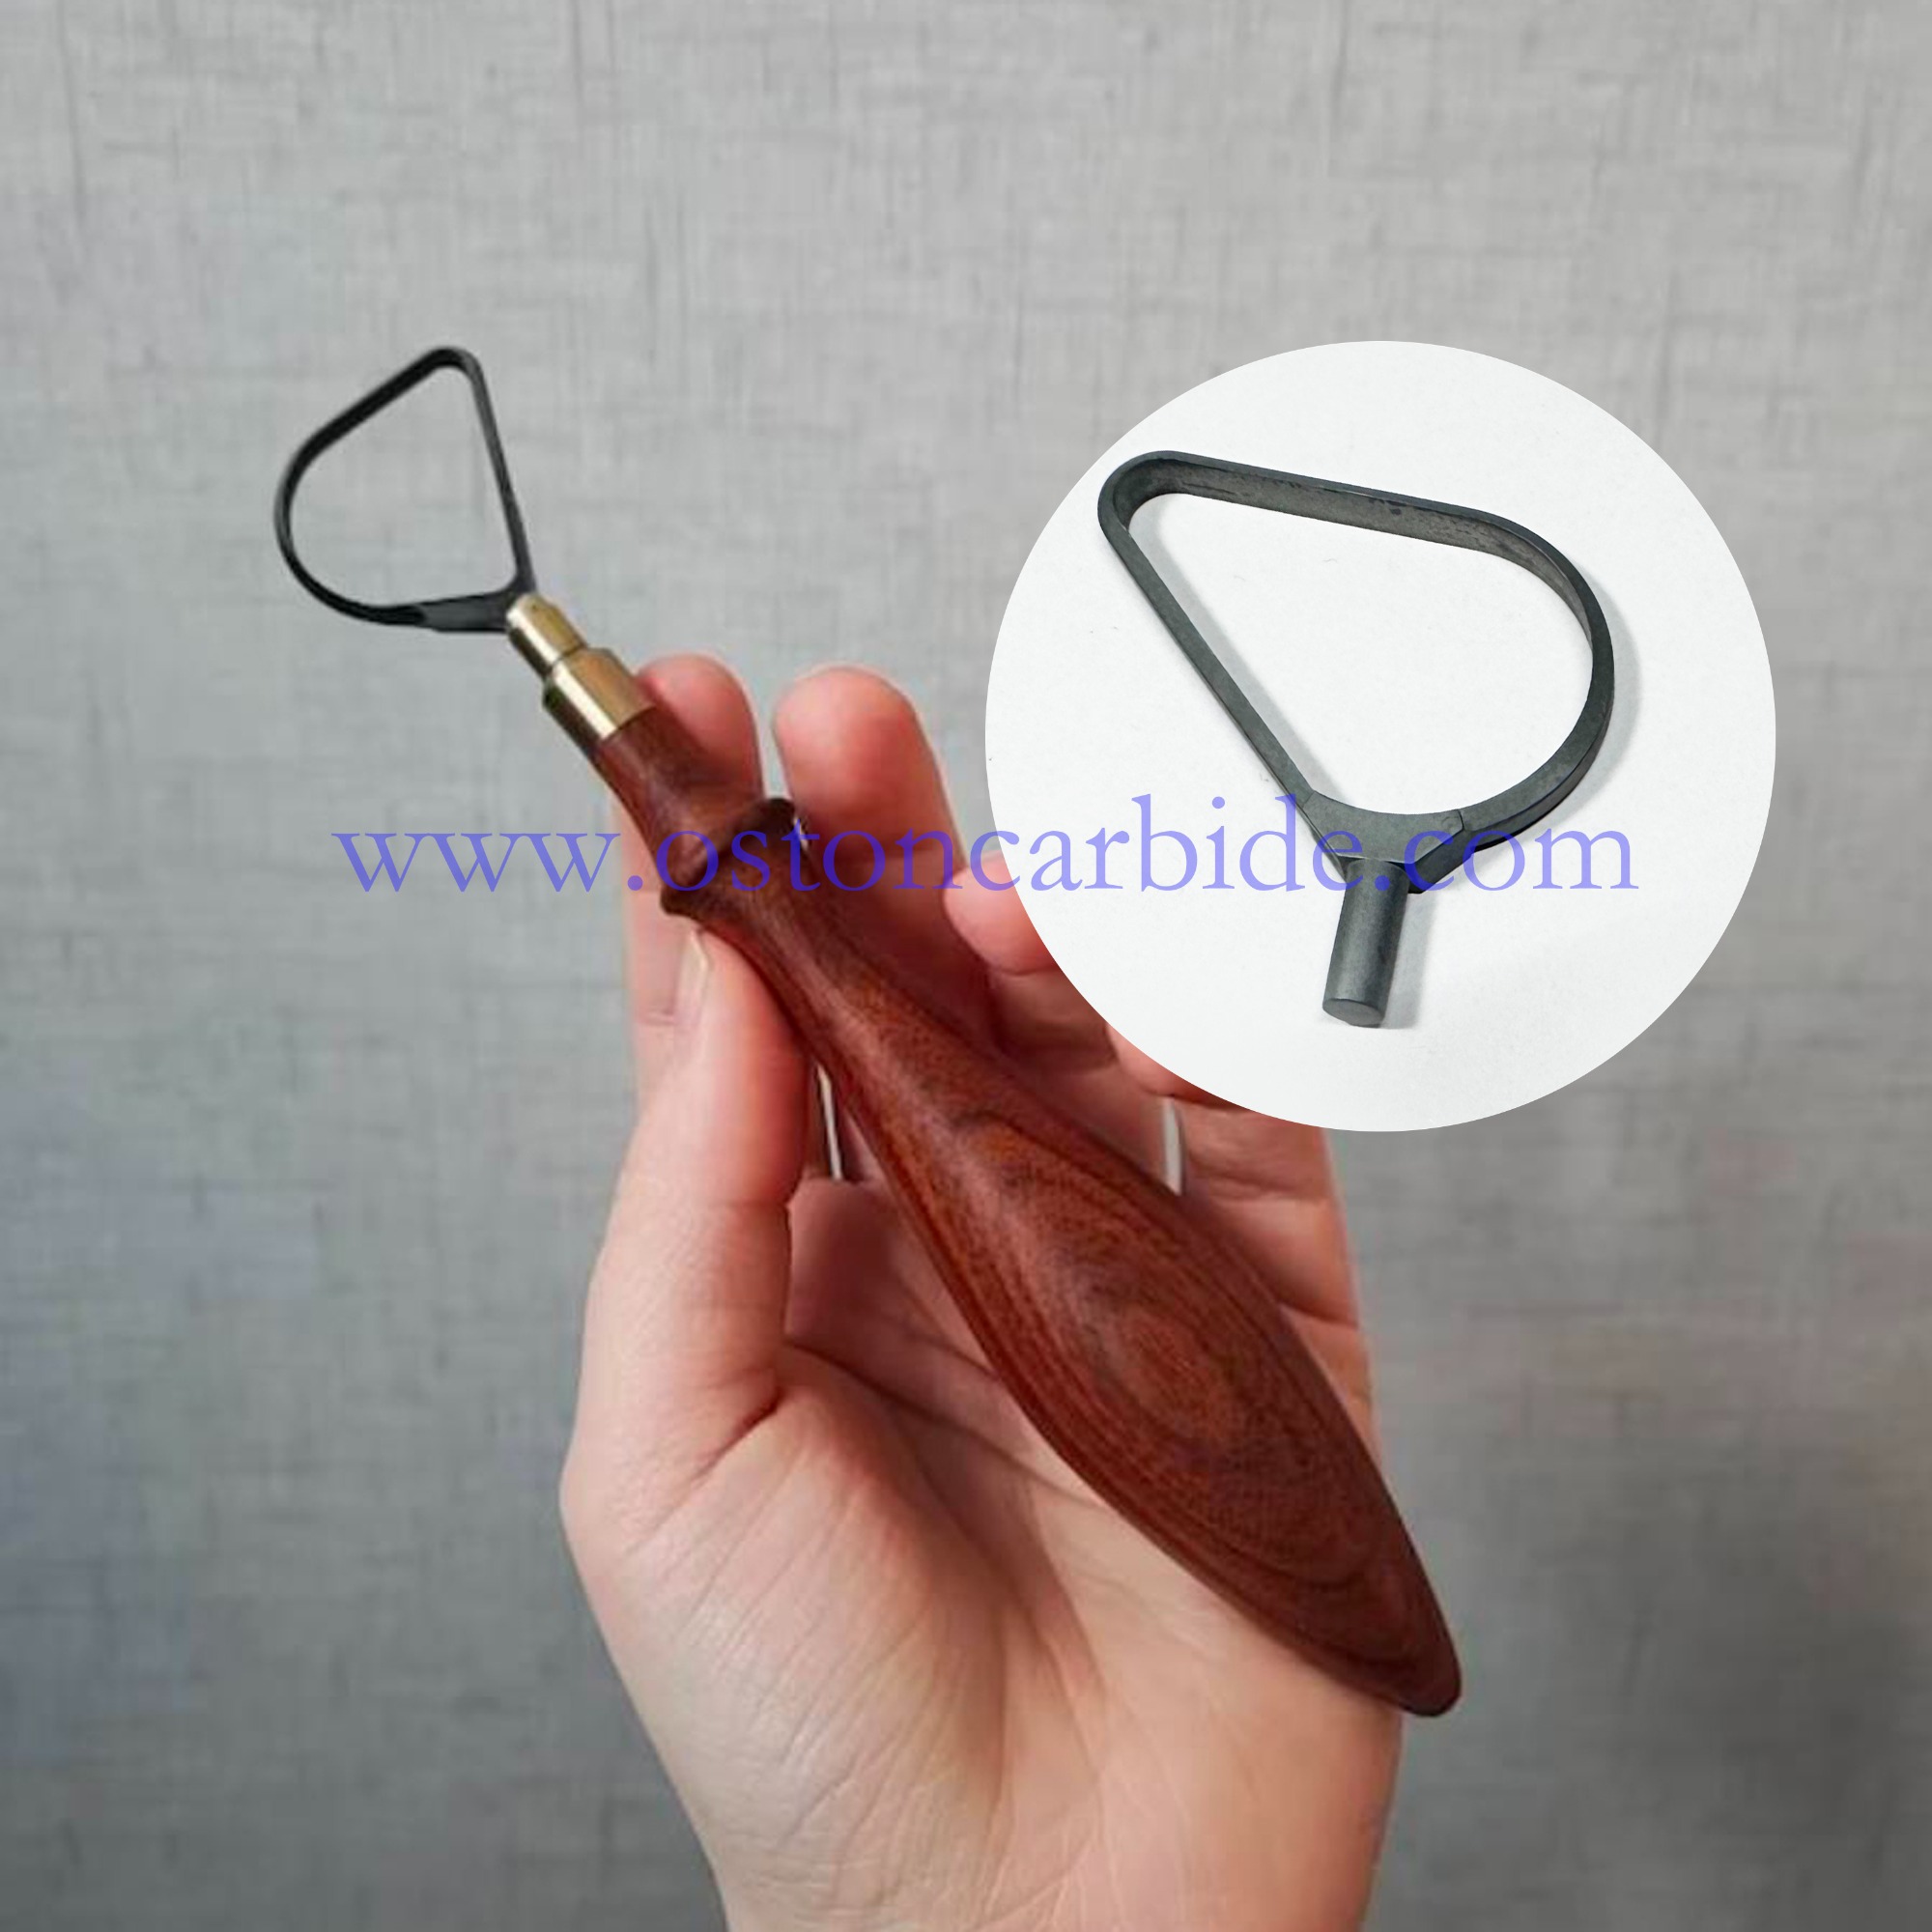 Pear Shaped Tungsten Carbide Looping Tool, The Hardest Pottery Trimming Tool